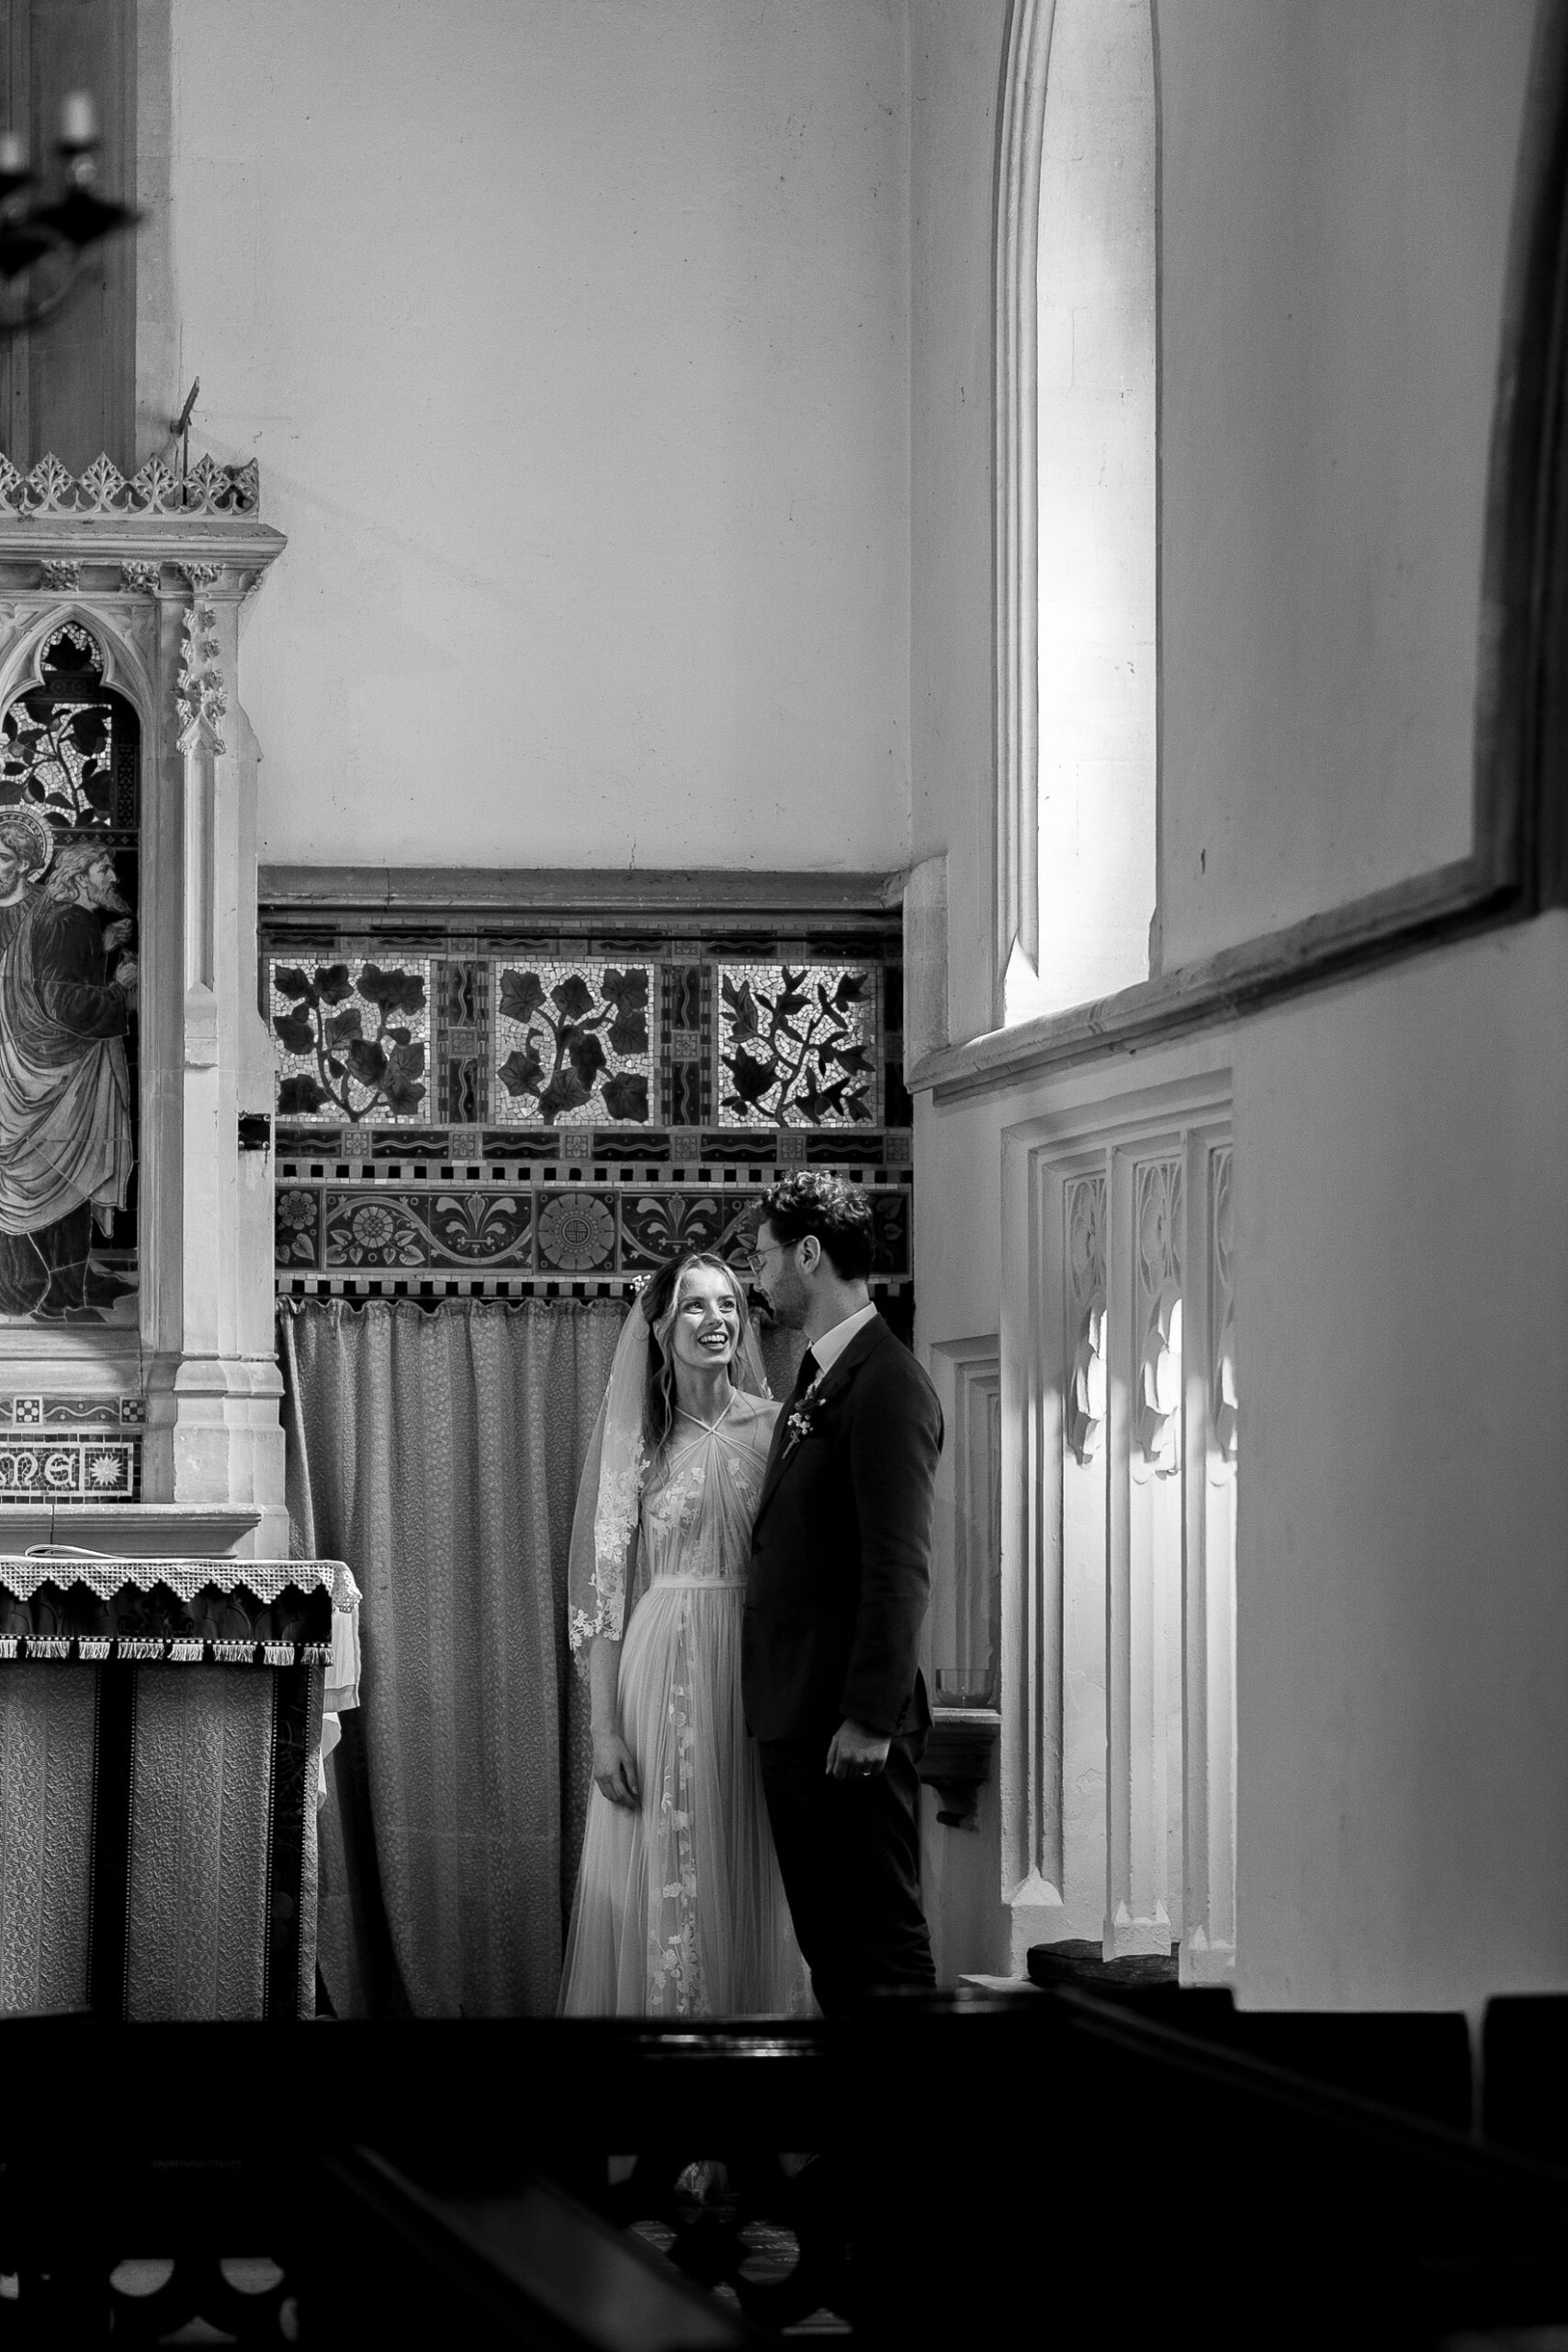 The bride and groom share a quiet moment during their church wedding in Gloucestershire